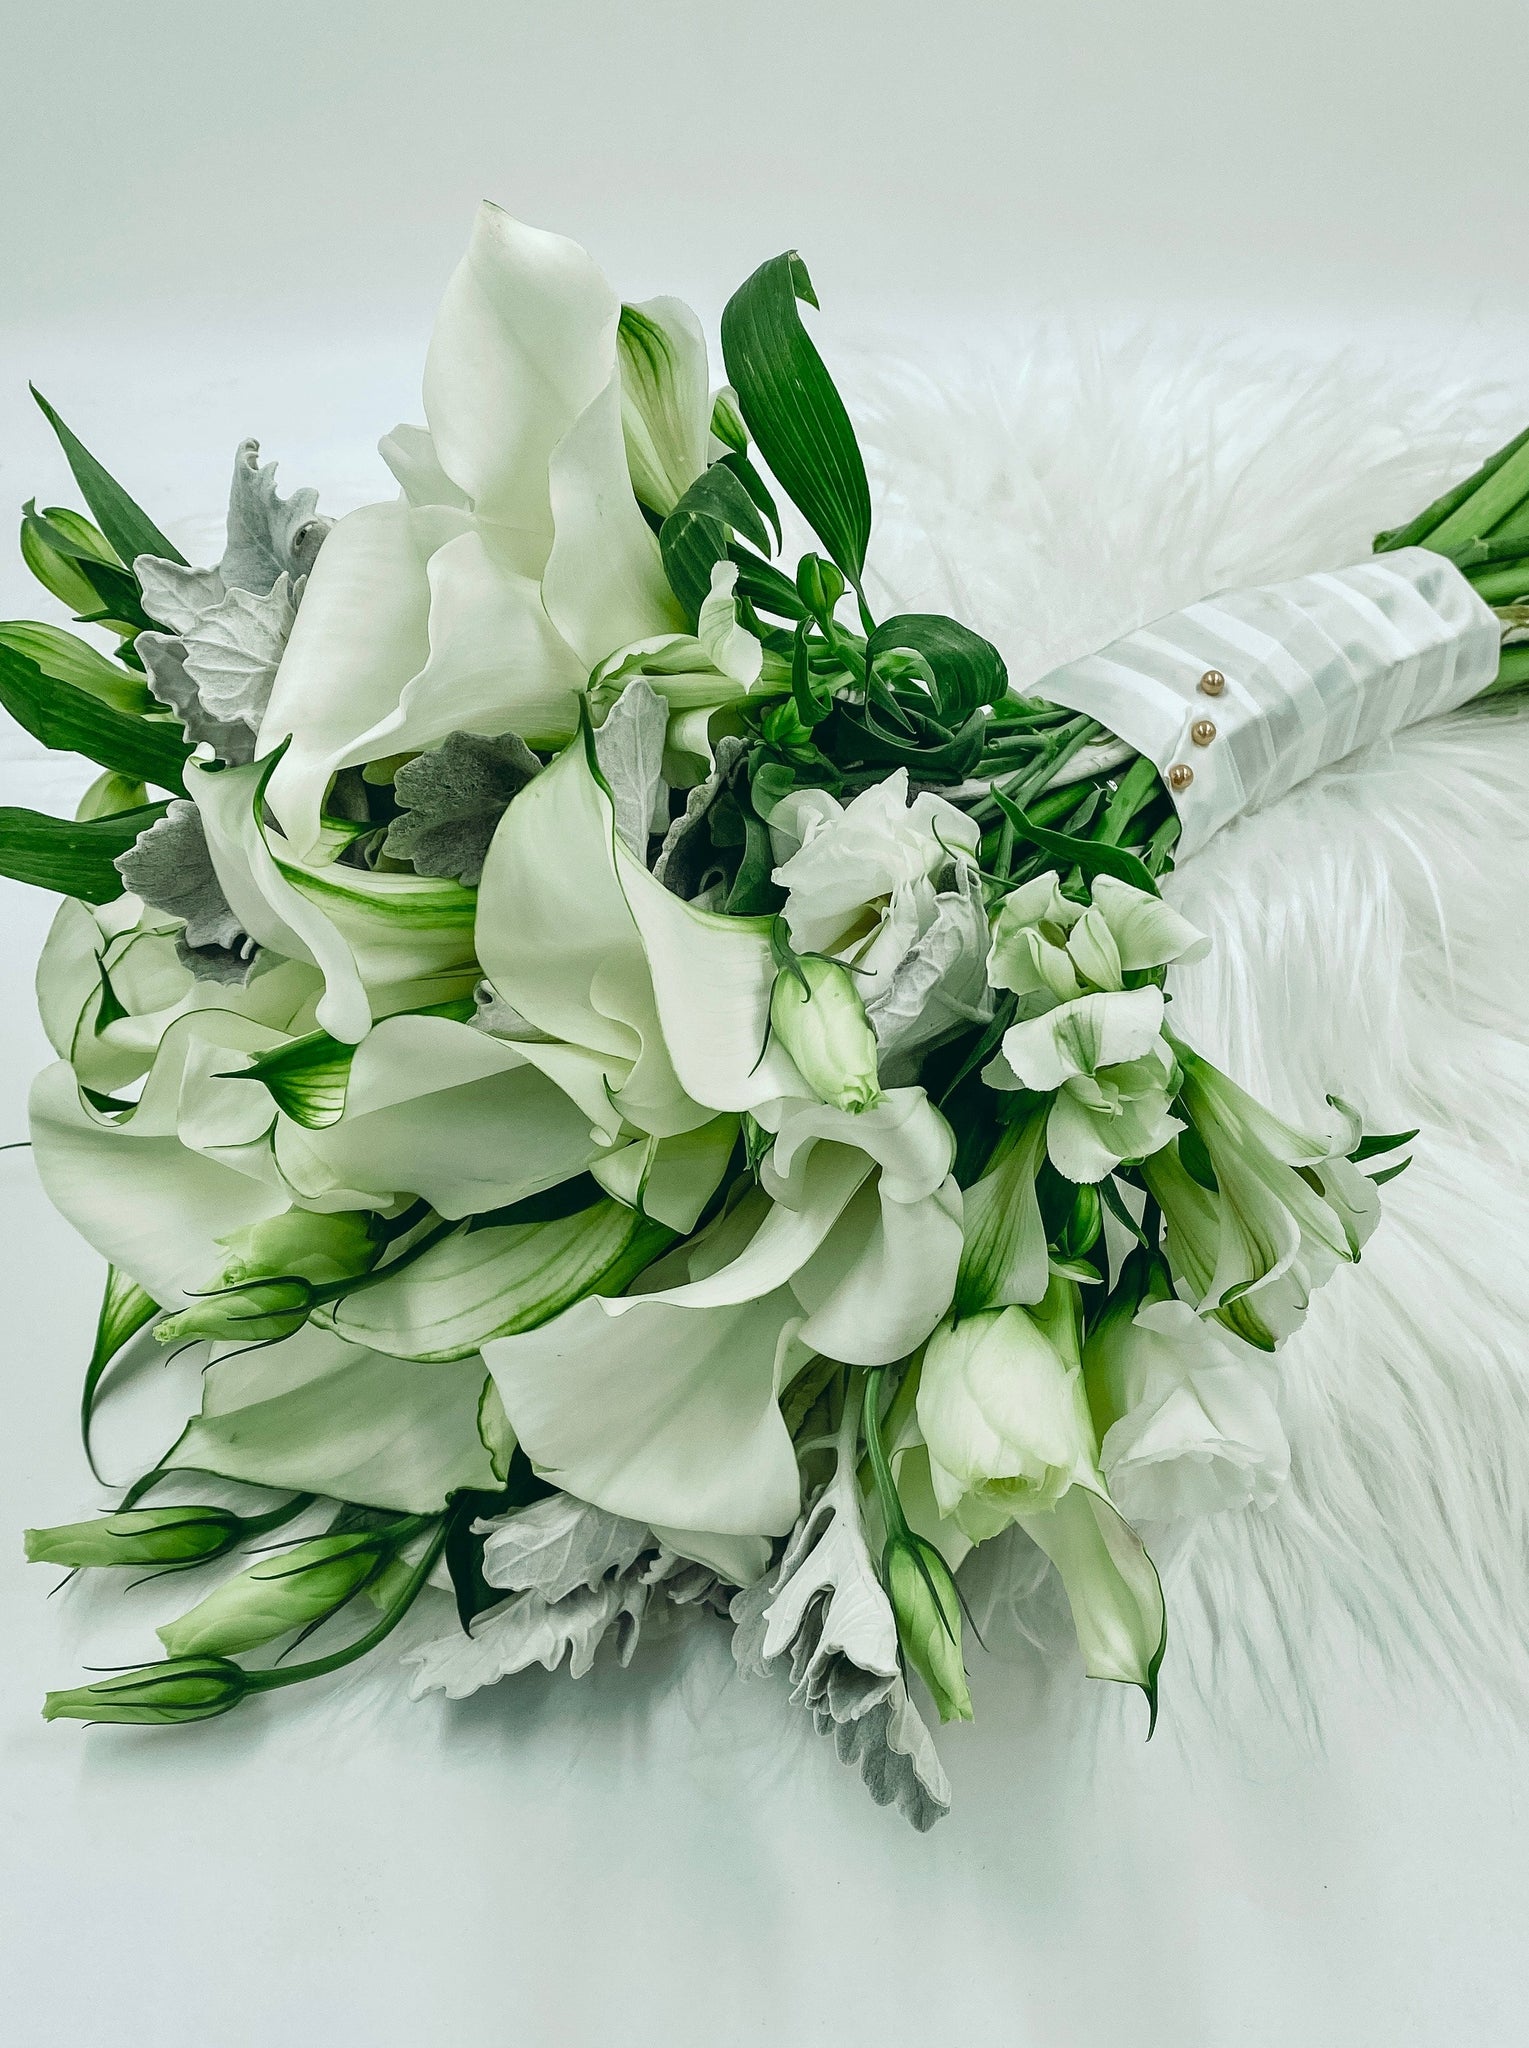 Customised wedding Bouquet Delivery Free delivery above $120